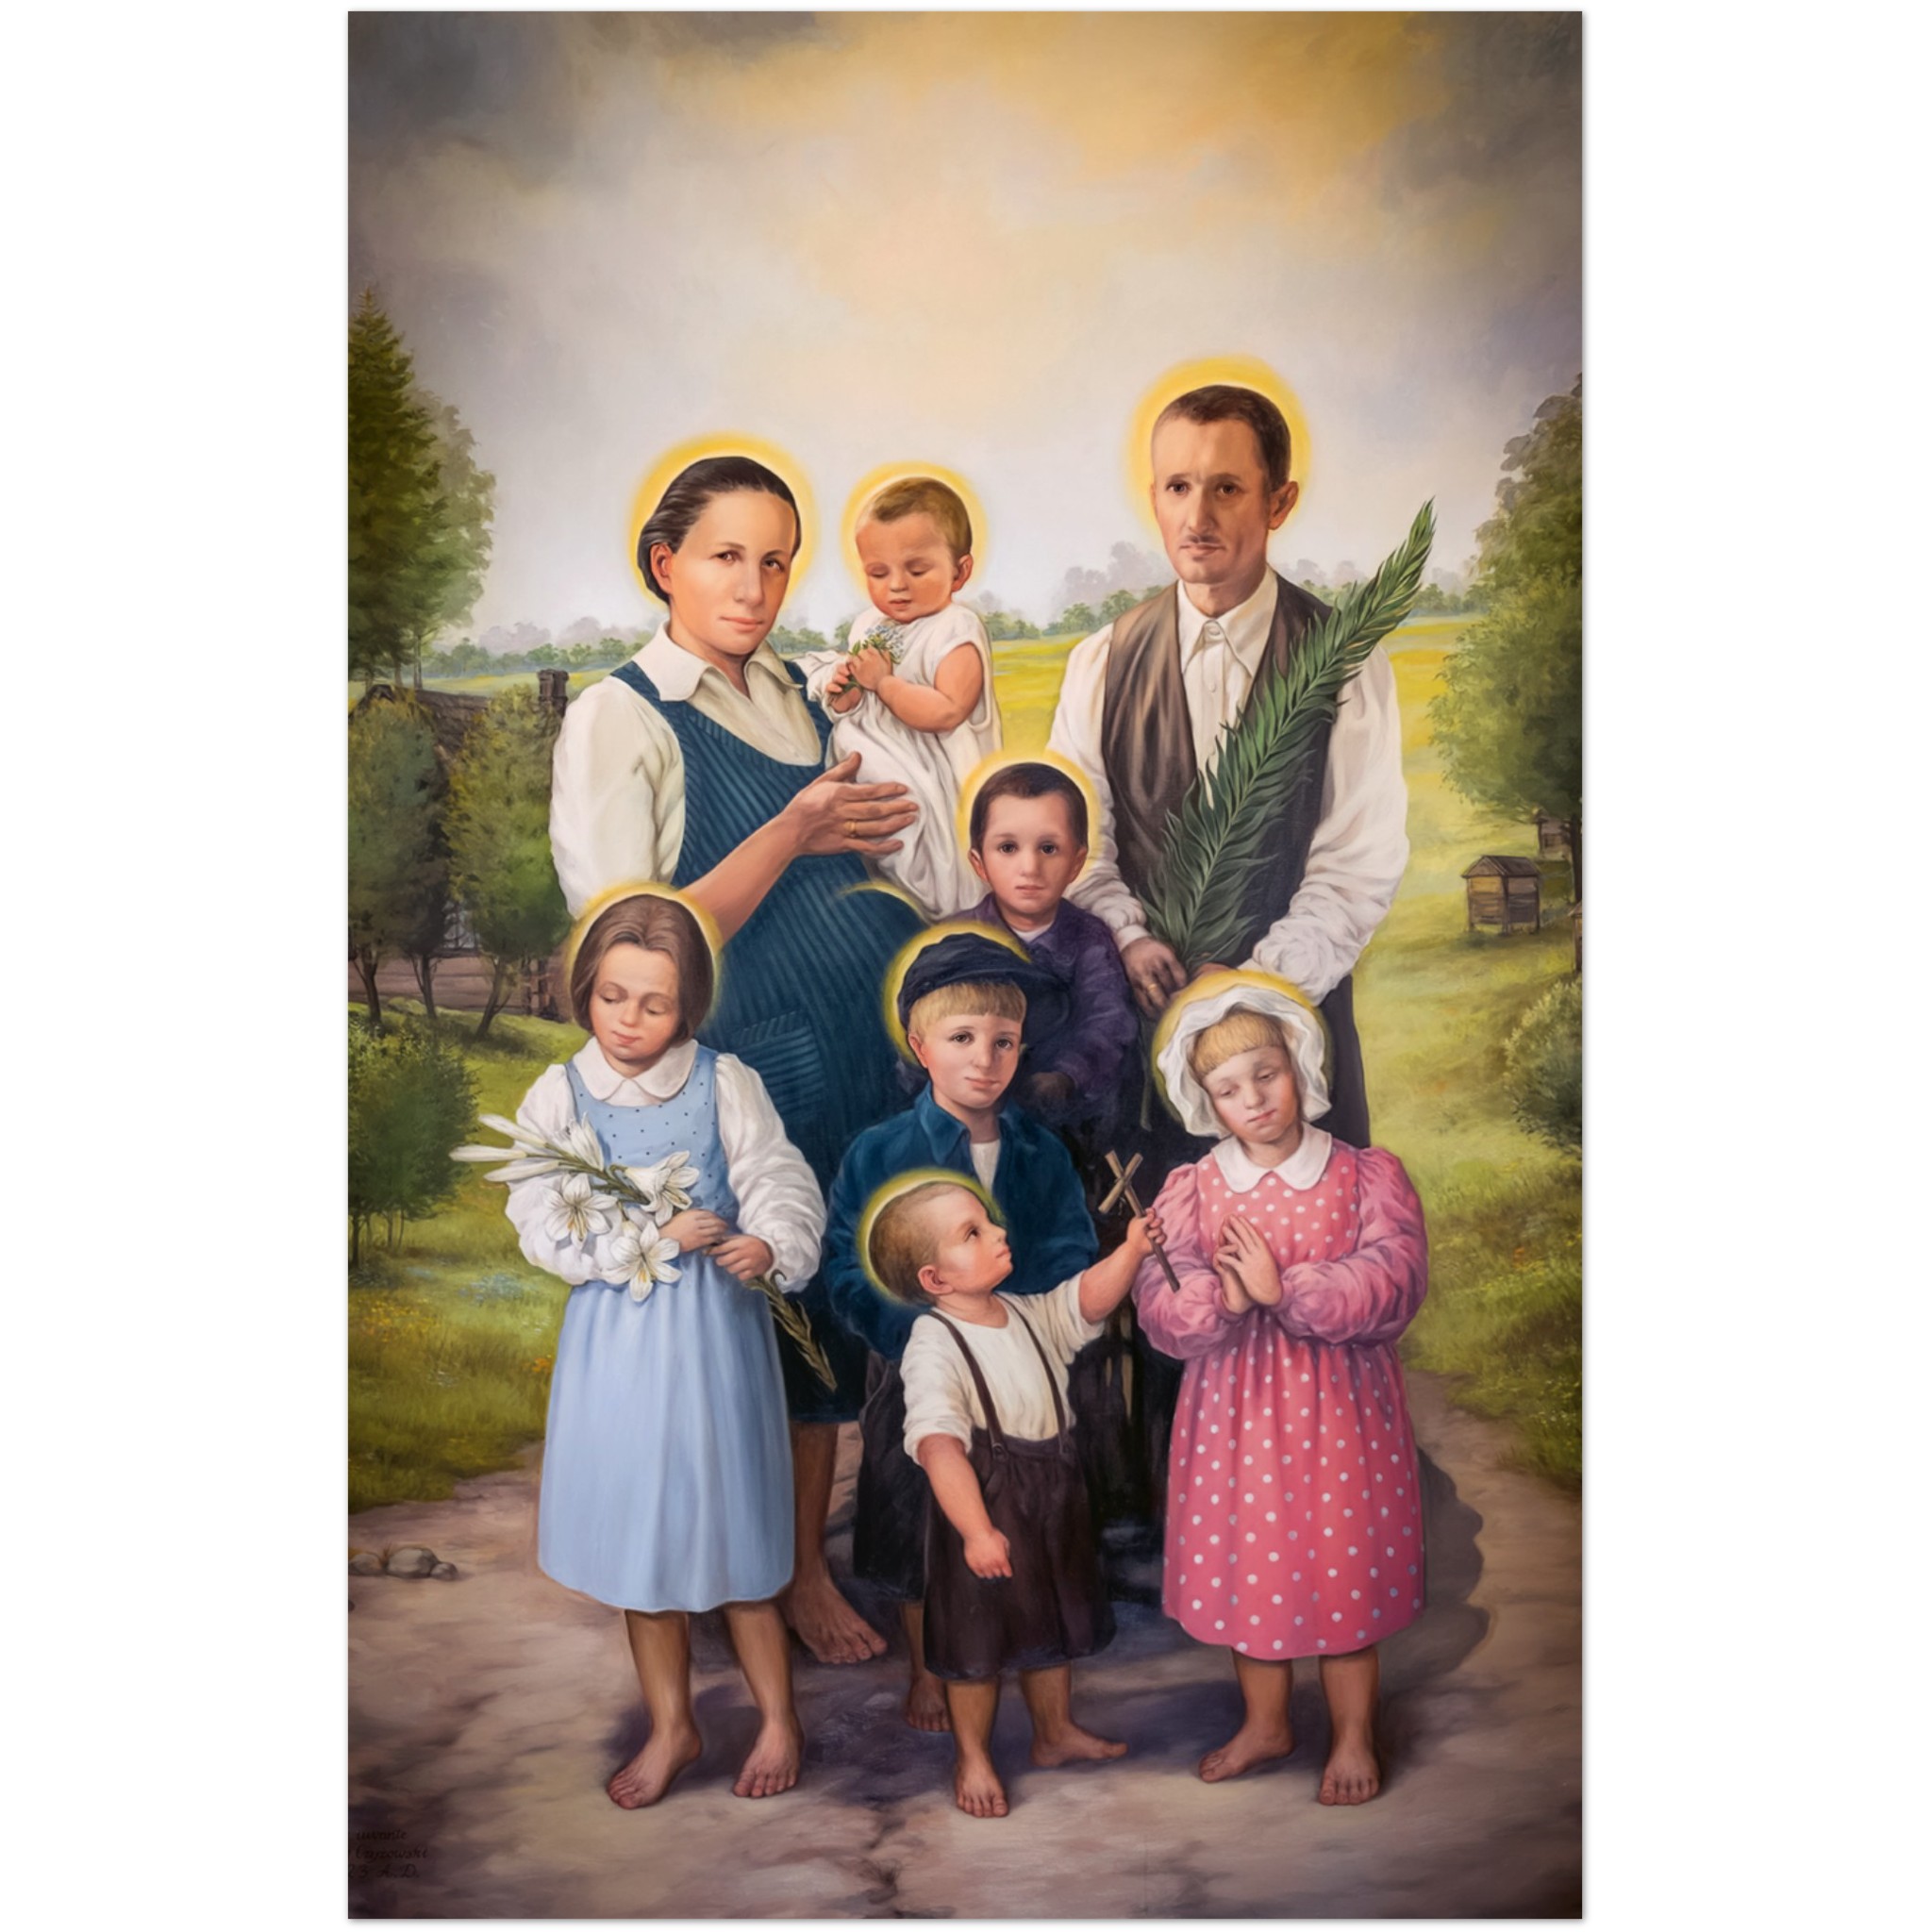 Ulma Family - 10 copies Silk Paper Print - Poland - Martyred and Blessed Together